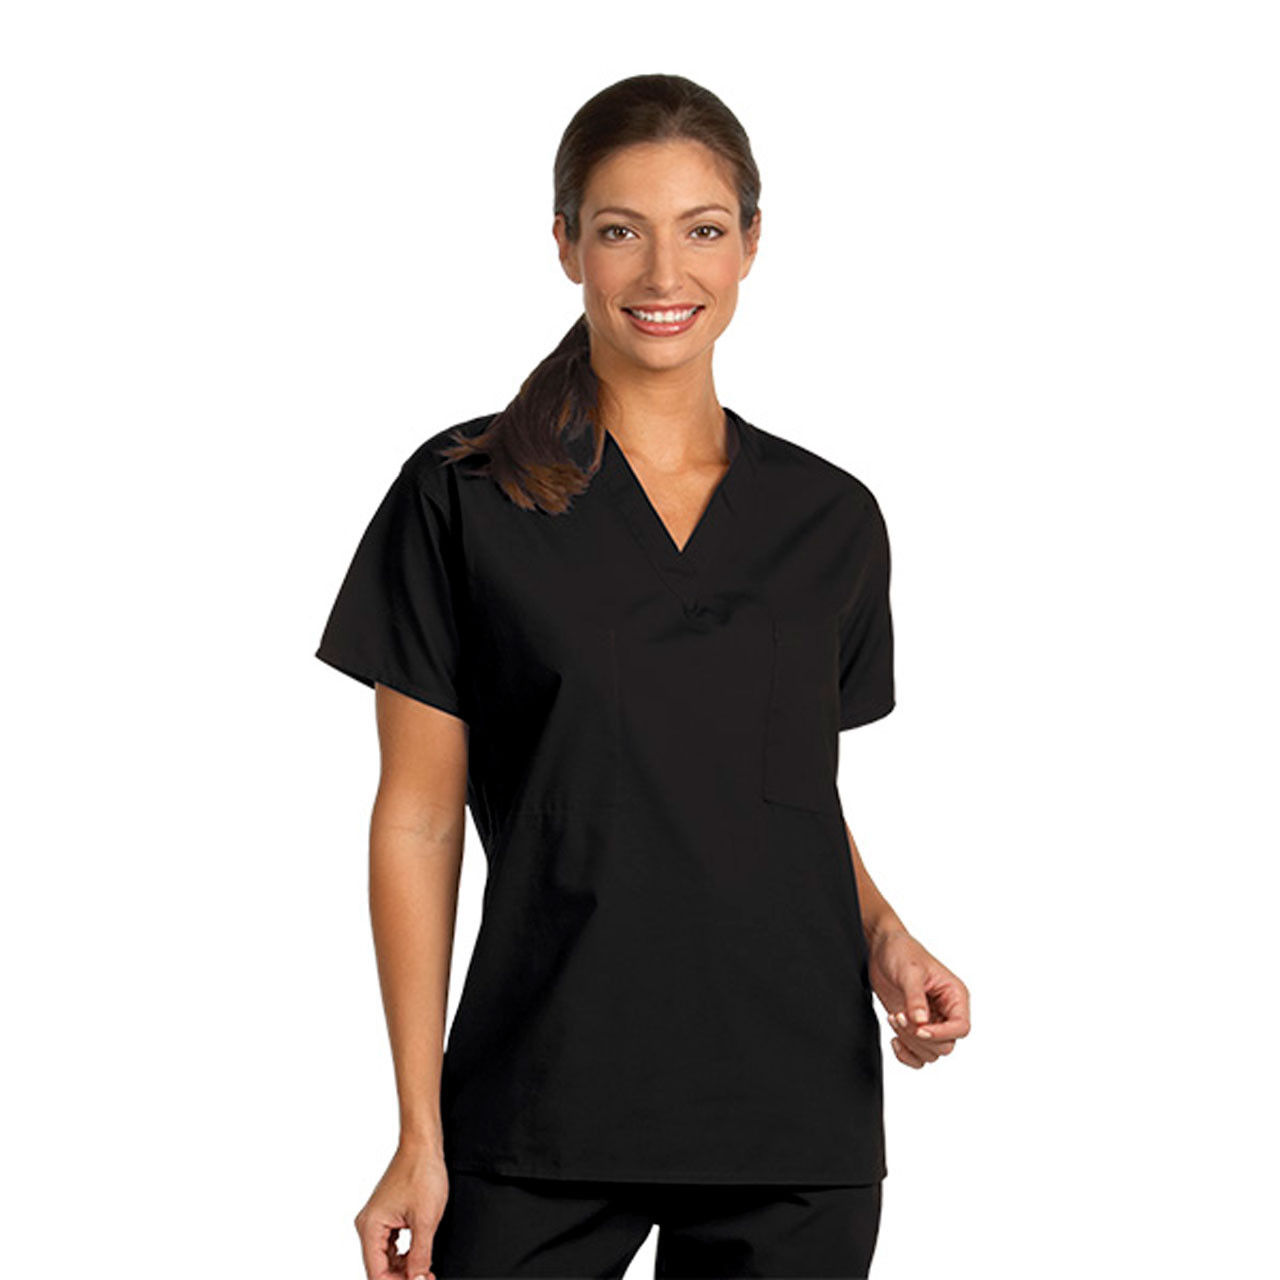 What features does the black medical scrubs top have?